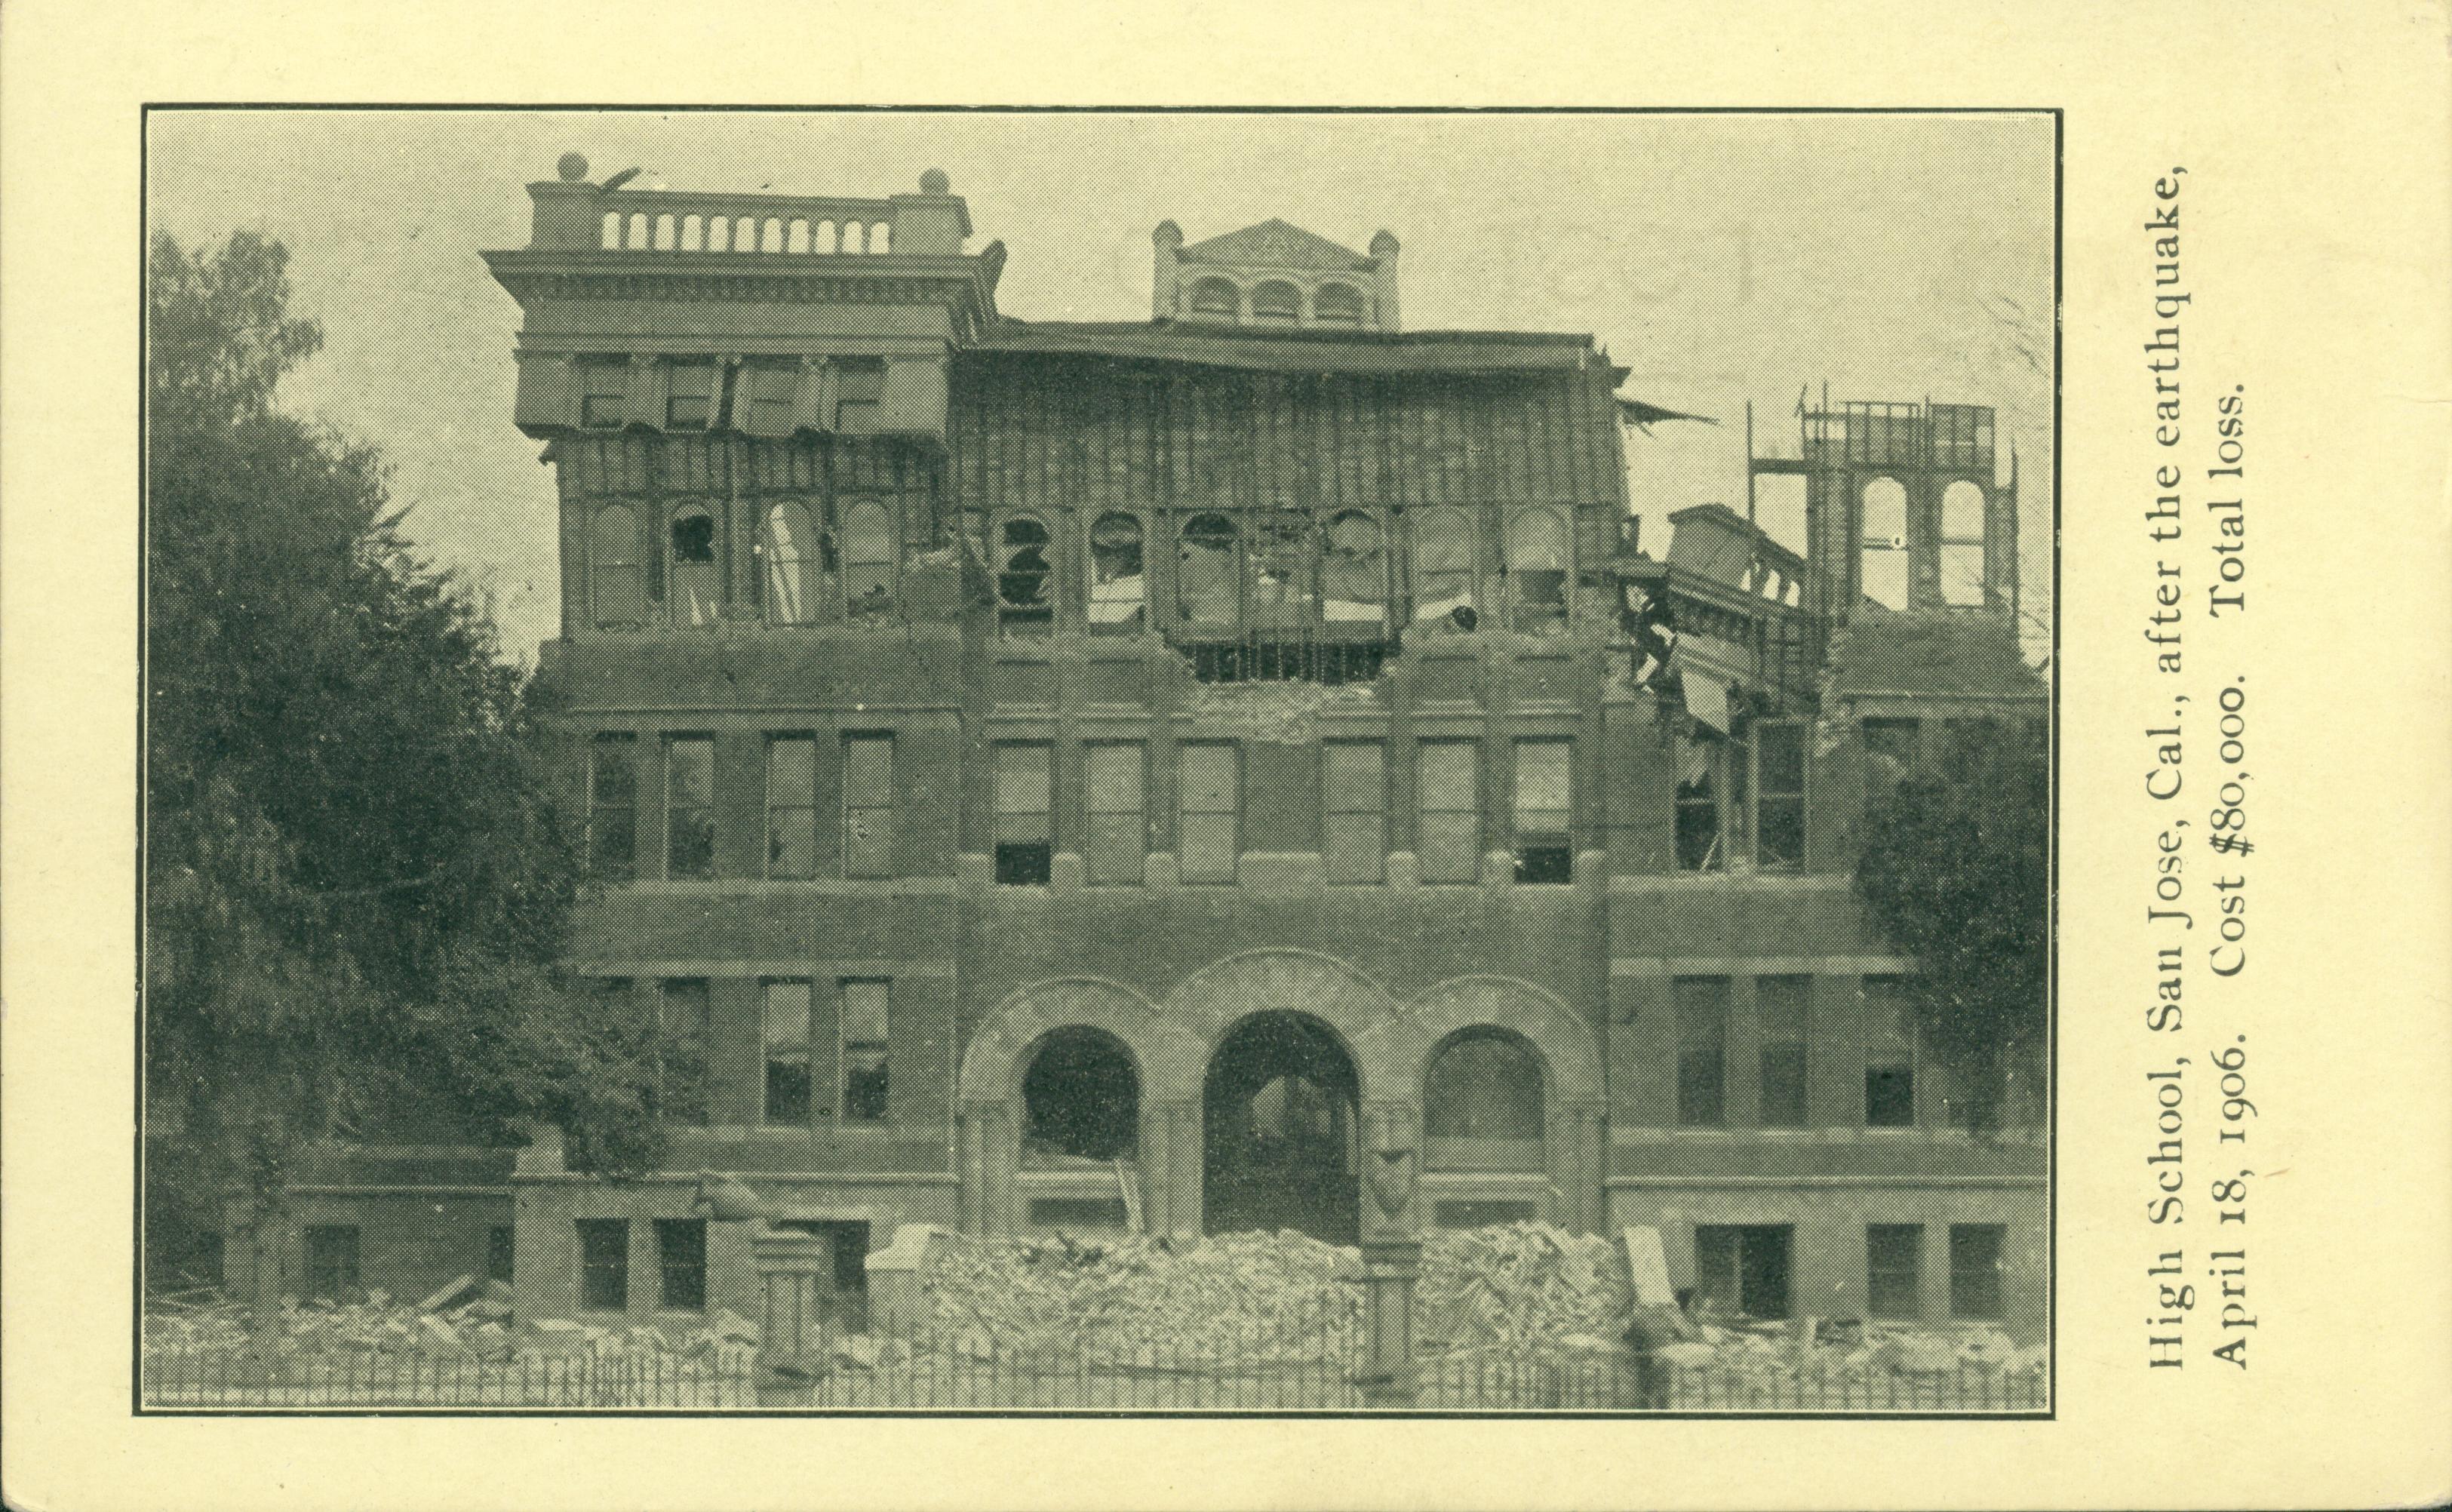 Shows the exterior of the High School in ruins